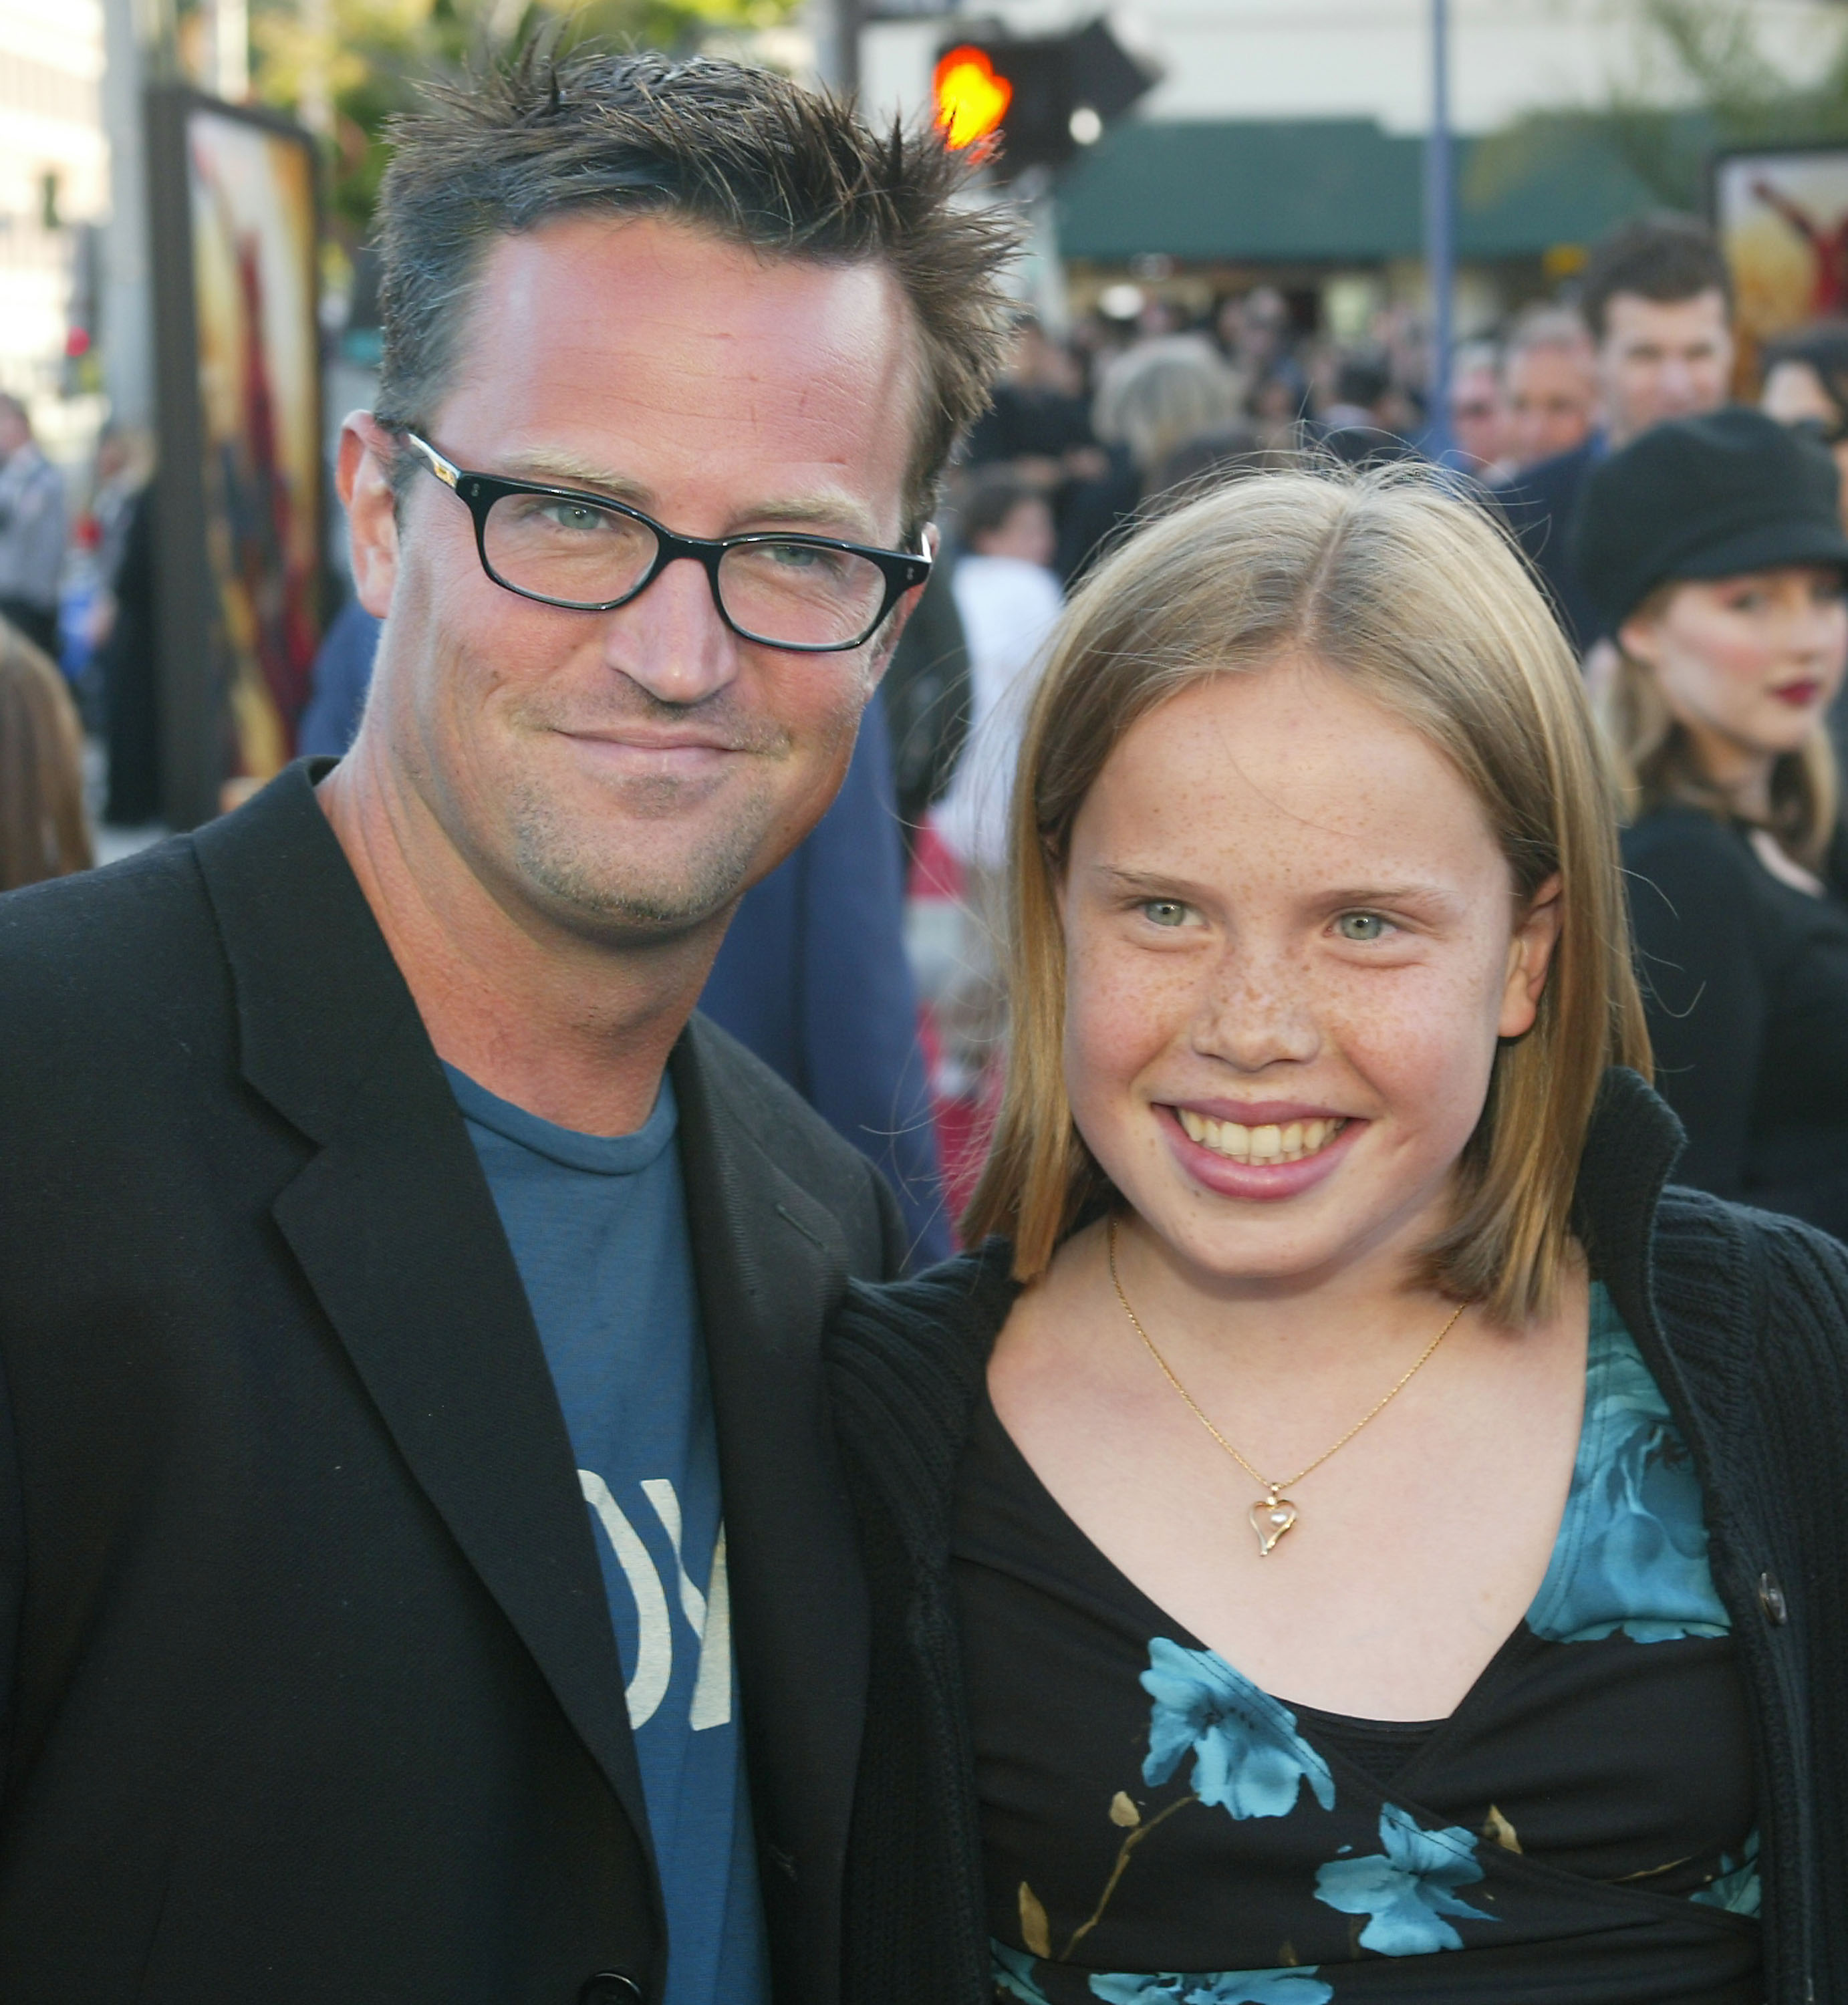 Matthew Perry and his sister Madelyn Morrison during the "Spider-Man" premiere on April 29, 2002 in Westwood, California | Source: Getty Images